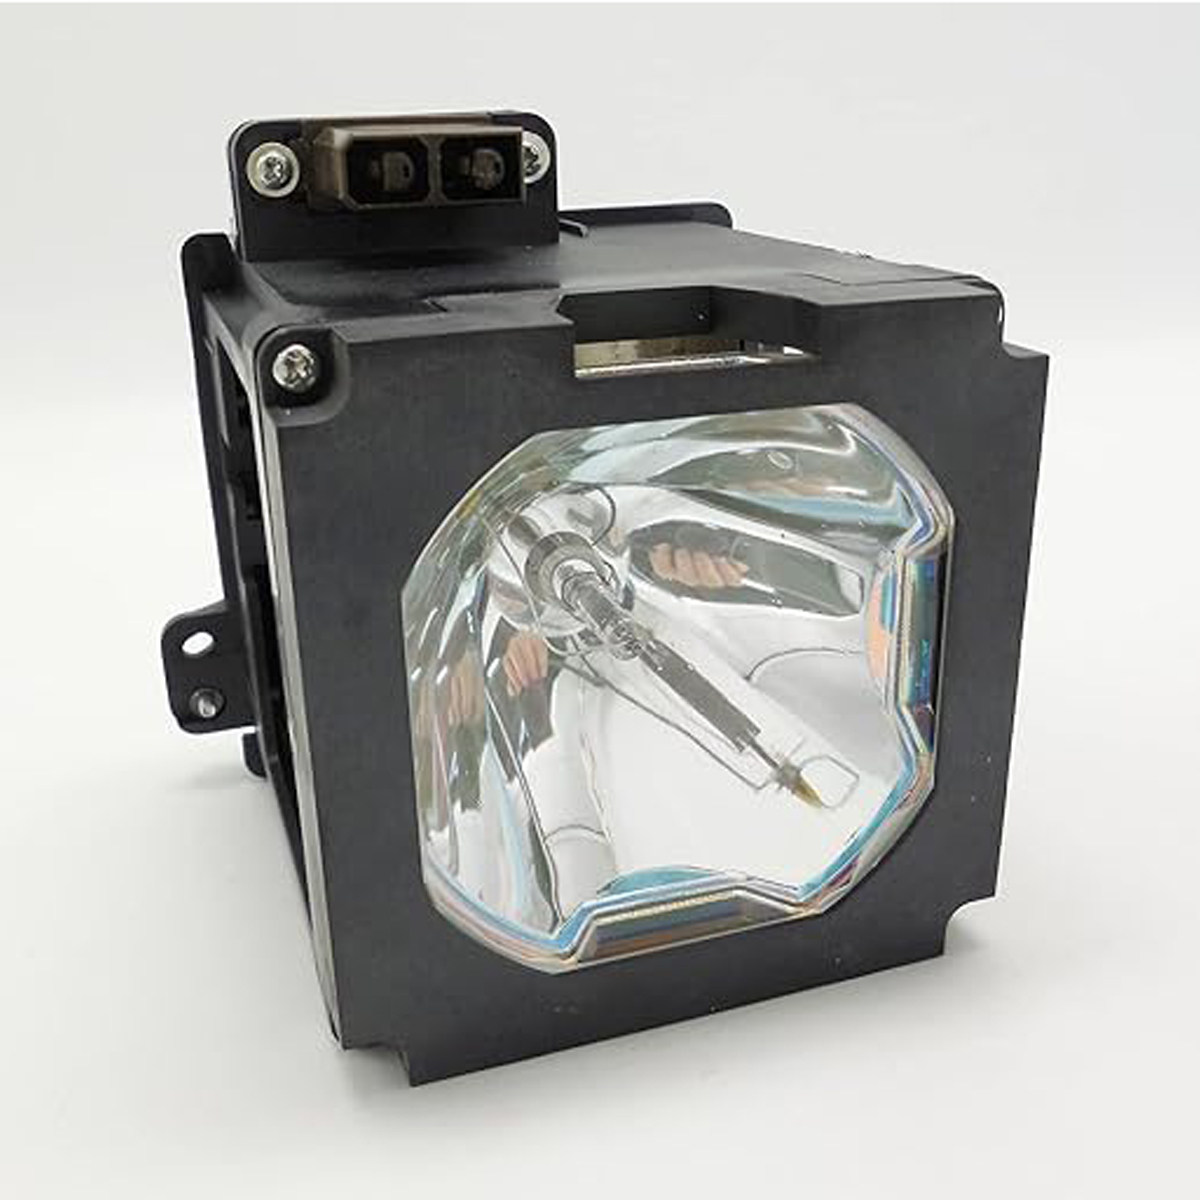 Replacement Projector lamp PJL-427 For YAMAHA DPX 1100/DPX 1200/ DPX 1300